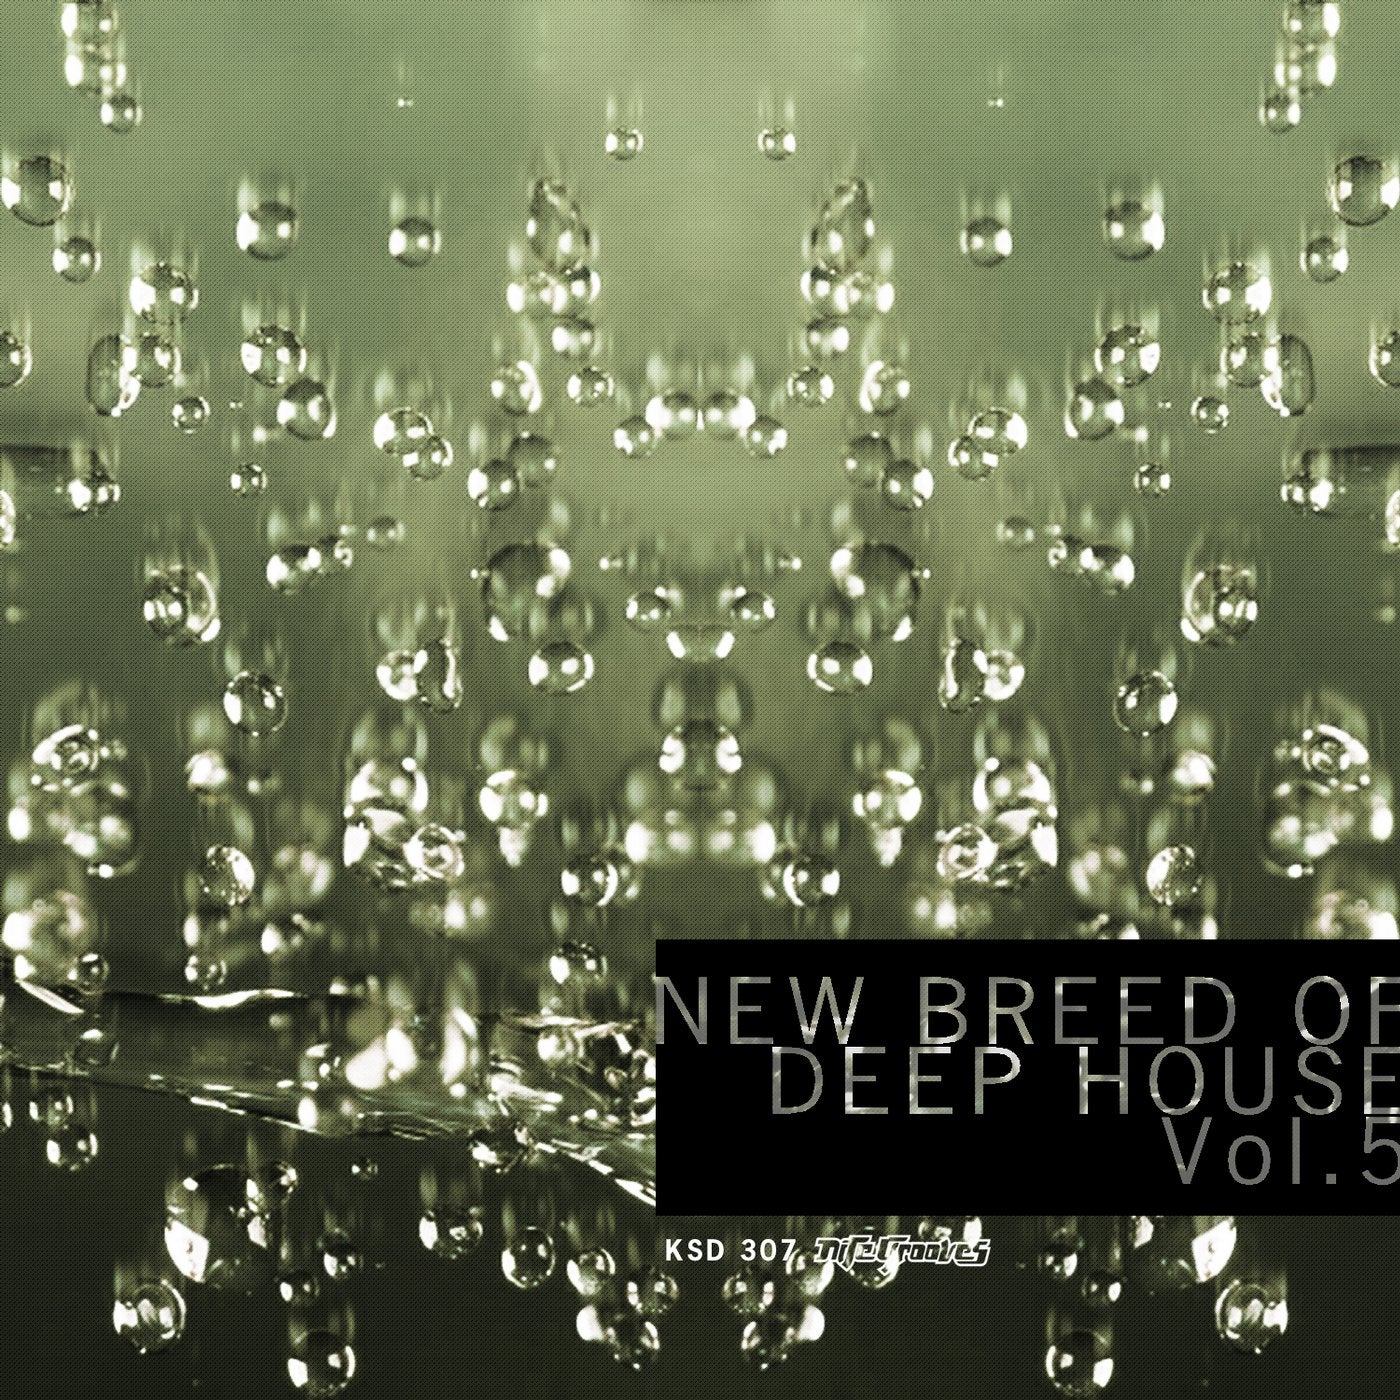 New Breed Of Deep House Vol. 5